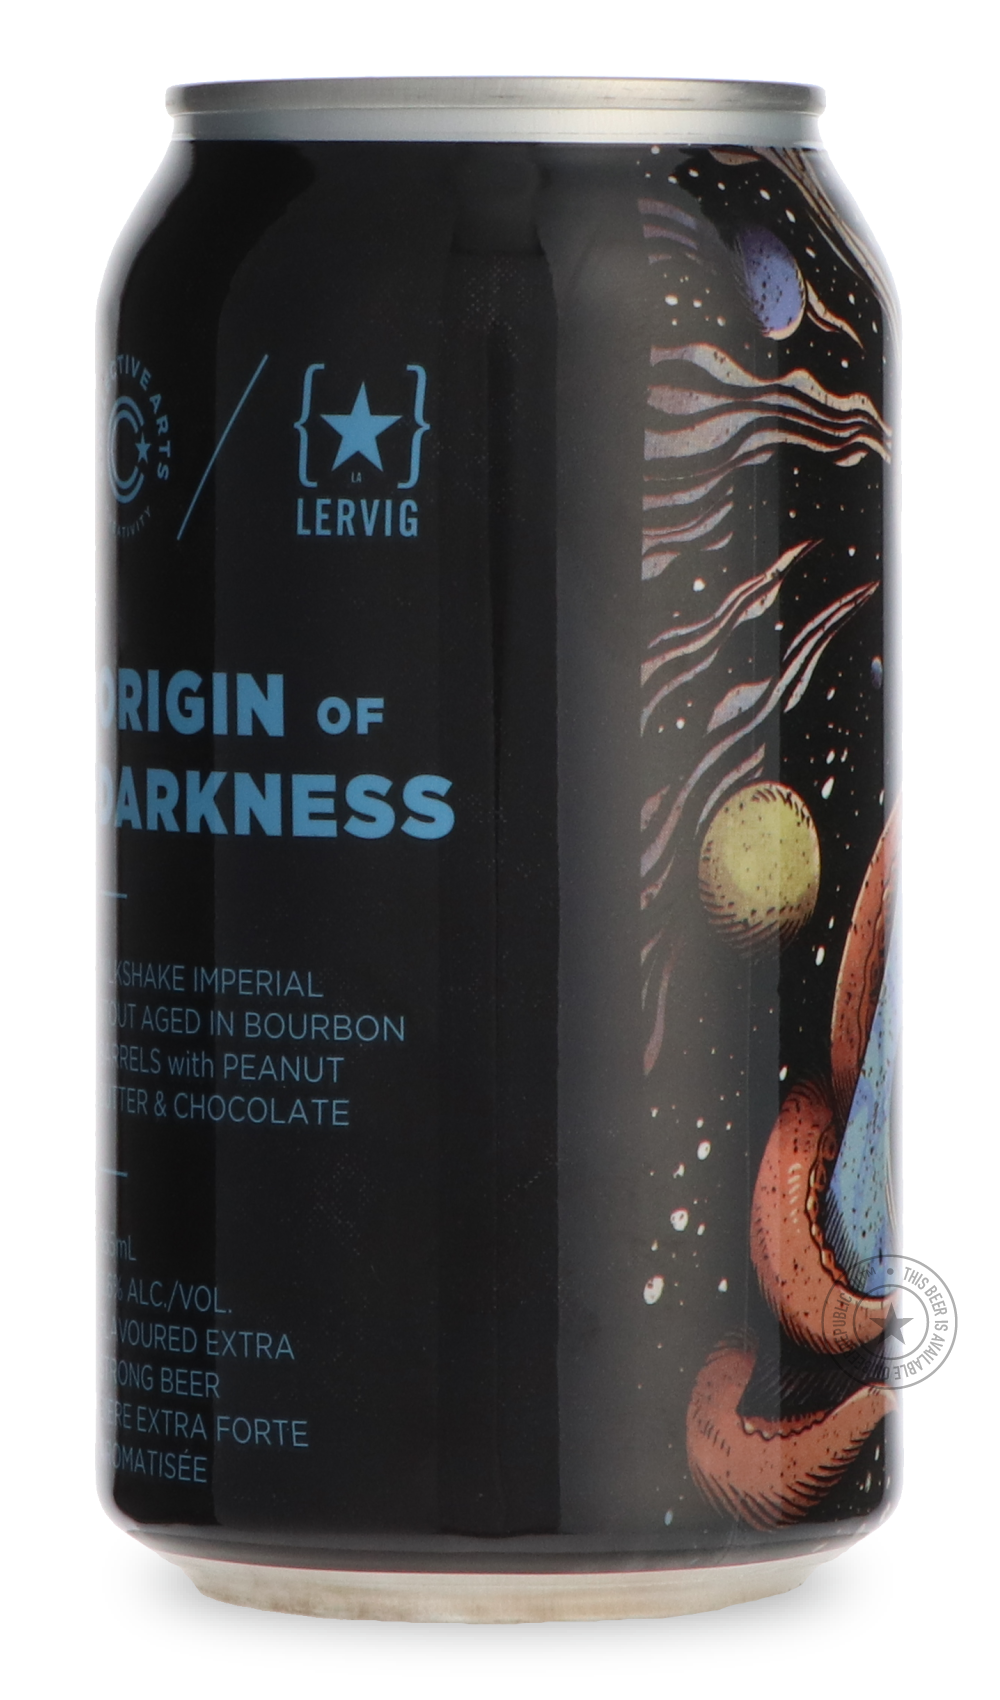 -Collective Arts- Origin of Darkness Peanut Butter & Chocolate / Lervig-Stout & Porter- Only @ Beer Republic - The best online beer store for American & Canadian craft beer - Buy beer online from the USA and Canada - Bier online kopen - Amerikaans bier kopen - Craft beer store - Craft beer kopen - Amerikanisch bier kaufen - Bier online kaufen - Acheter biere online - IPA - Stout - Porter - New England IPA - Hazy IPA - Imperial Stout - Barrel Aged - Barrel Aged Imperial Stout - Brown - Dark beer - Blond - Bl